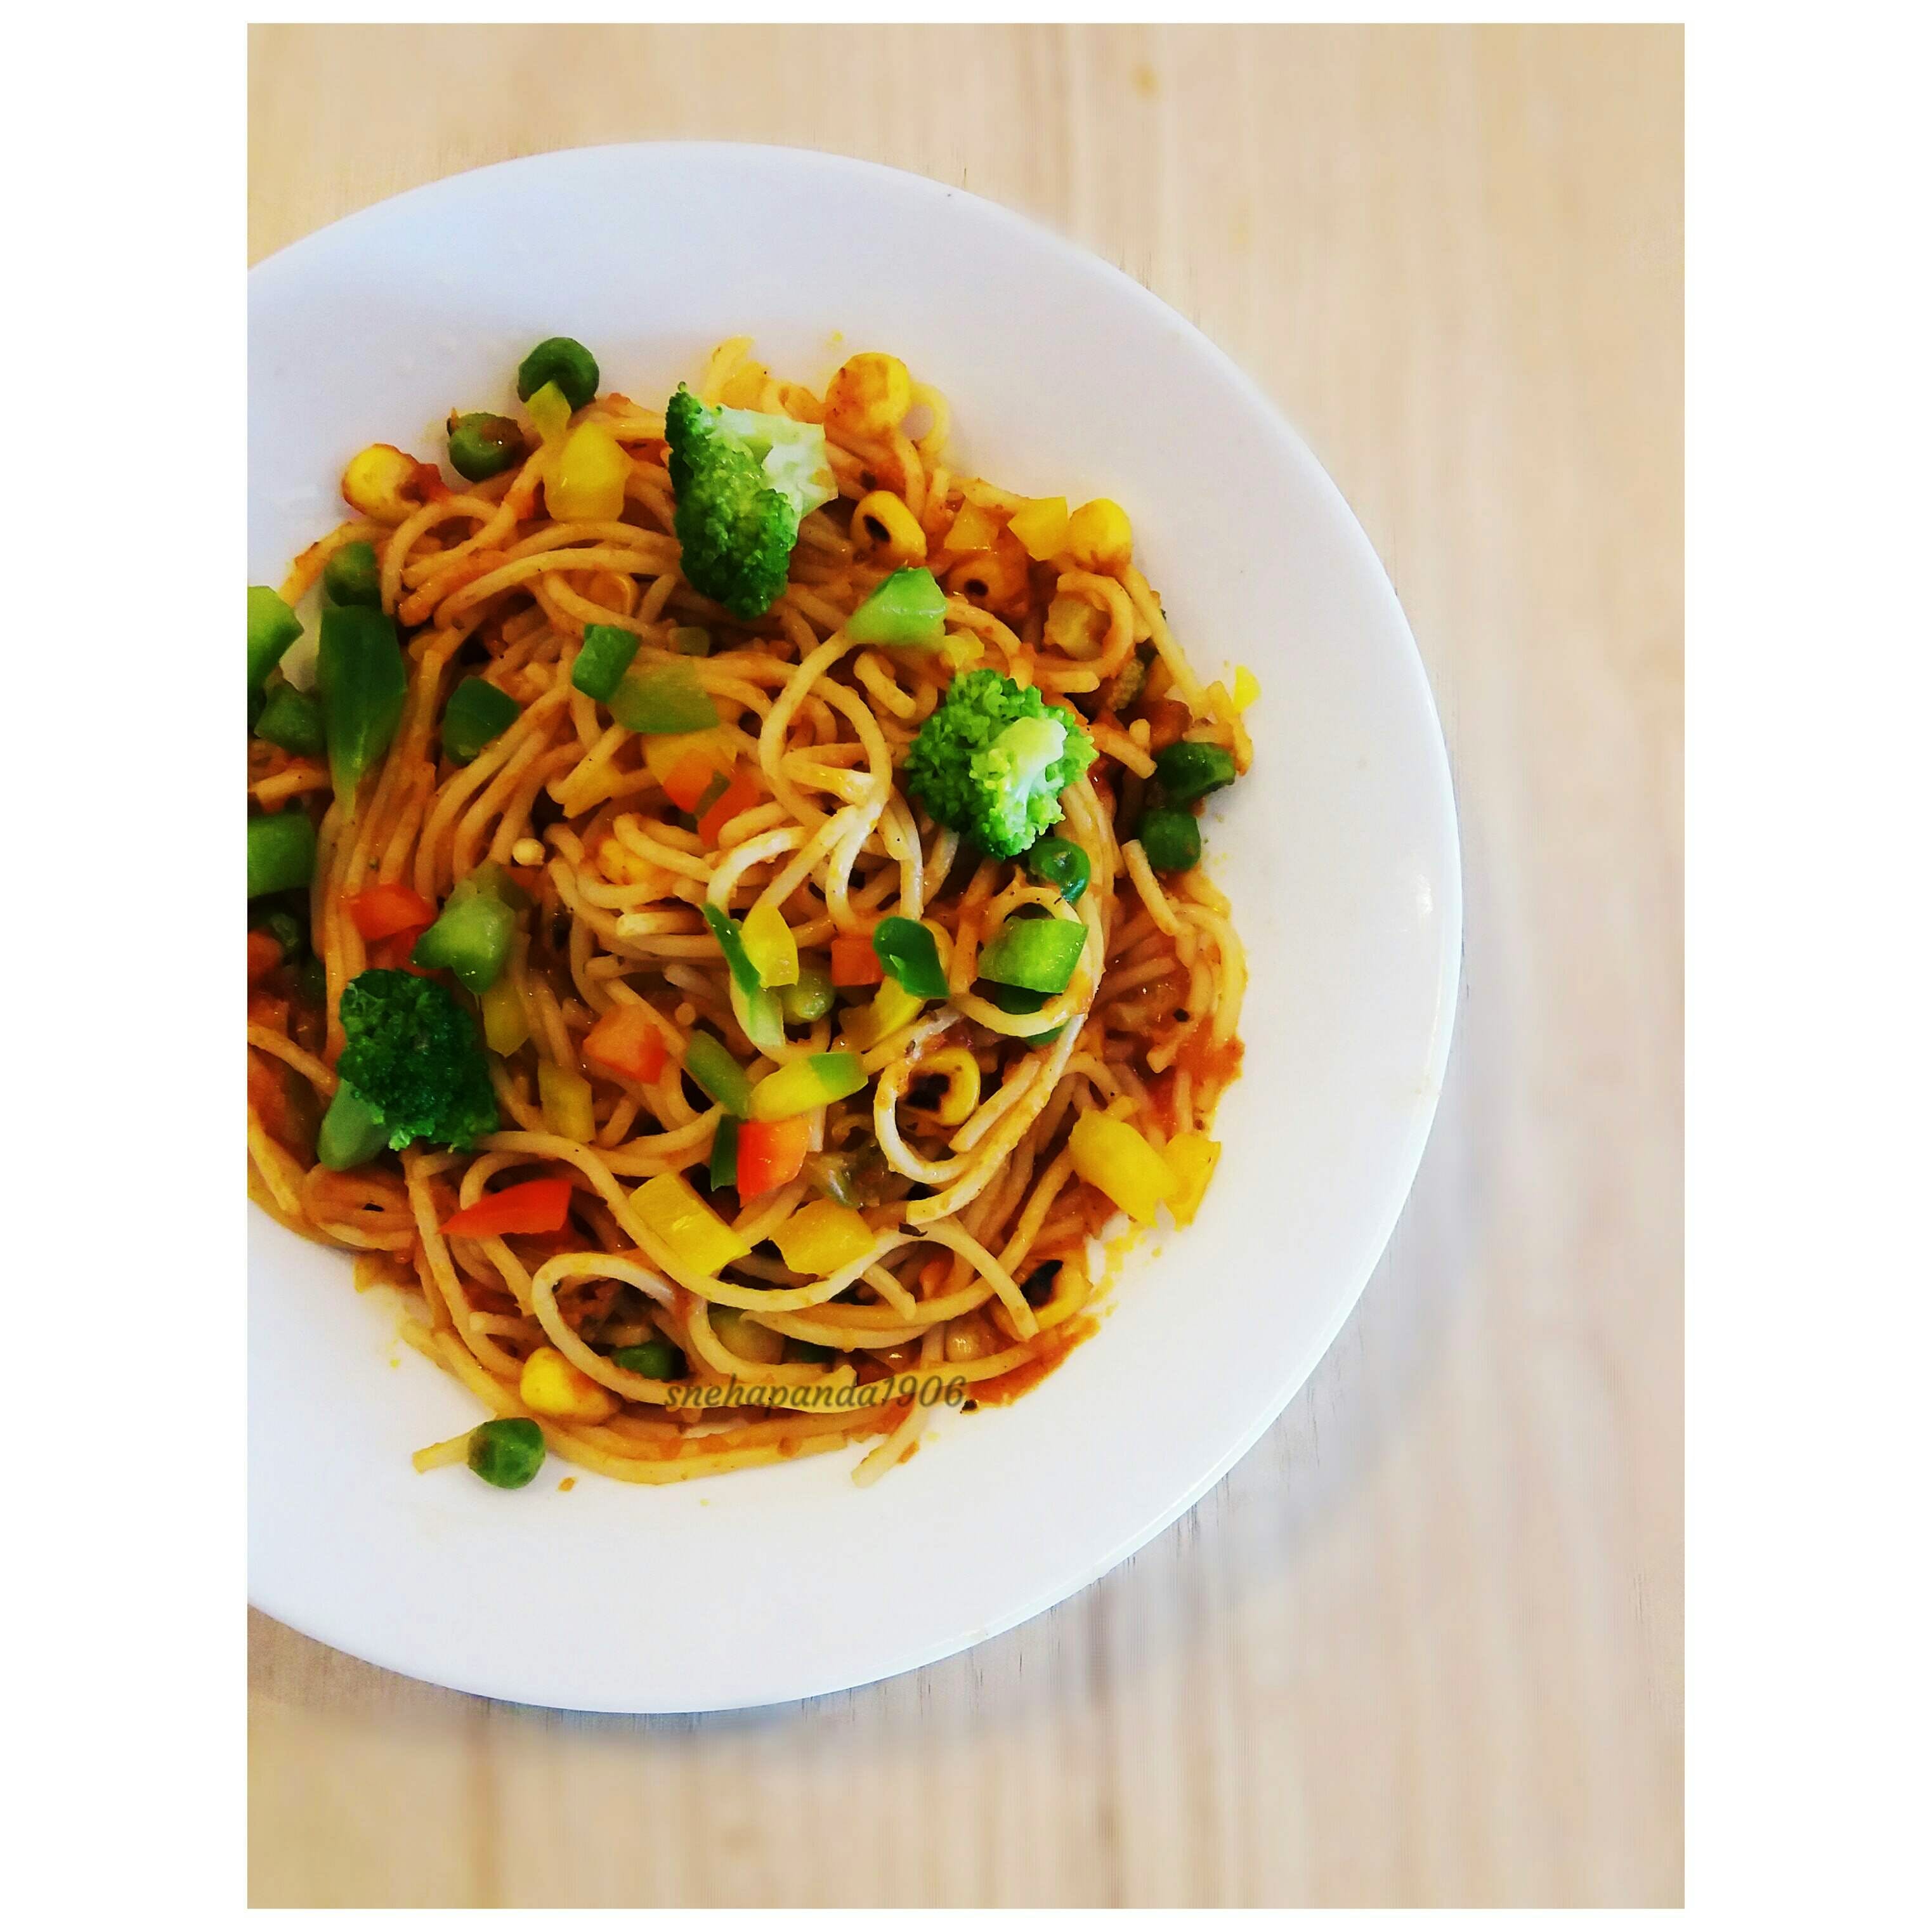 Cuisine,Food,Noodle,Dish,Spaghetti,Ingredient,Chow mein,Lo mein,Italian food,Fried noodles